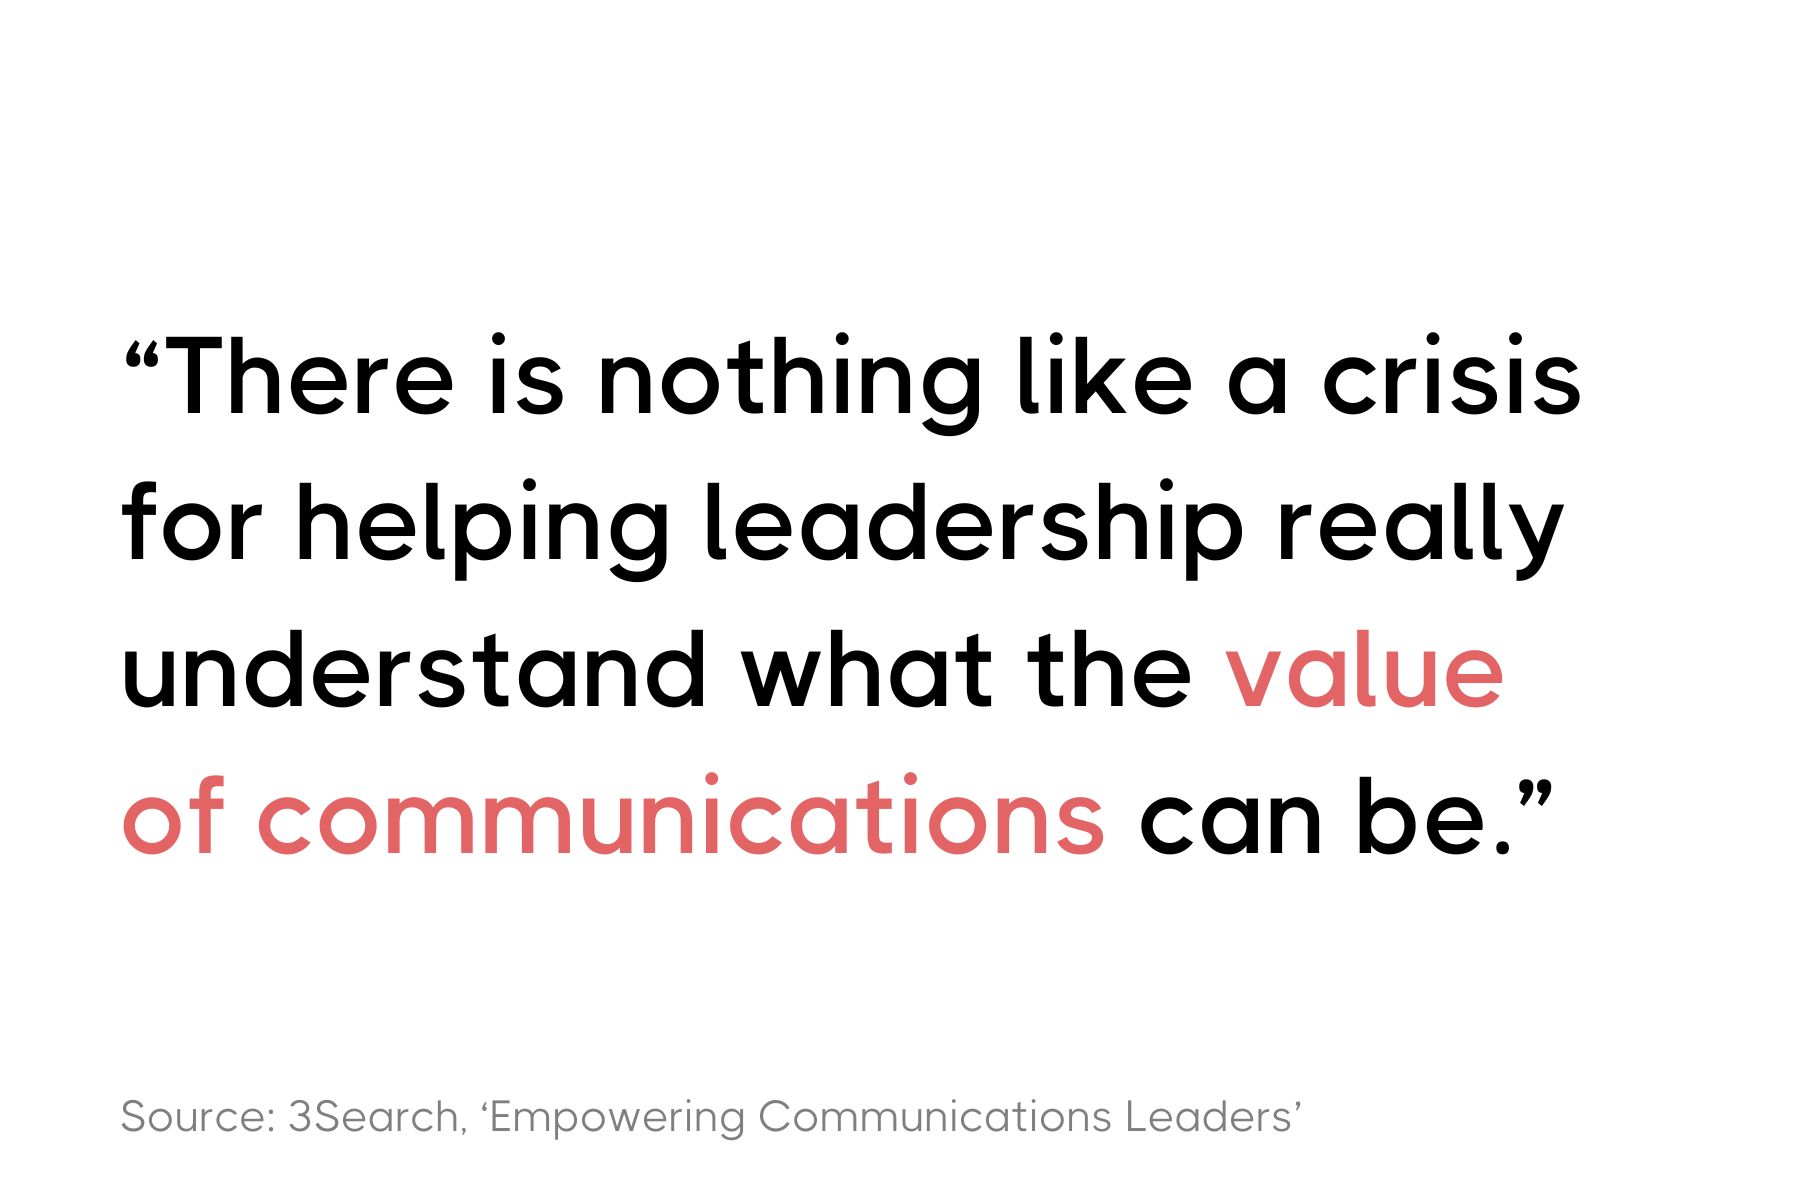 This image features a quote in a clean, text-based design. The quote reads: "There is nothing like a crisis for helping leadership really understand what the value of communications can be." The source is cited below the quote as: "Source: 3Search, 'Empowering Communications Leaders'". The quote is set in a bold and modern font, with most of the text in black and the word "value" highlighted in red. The background of the image is white.